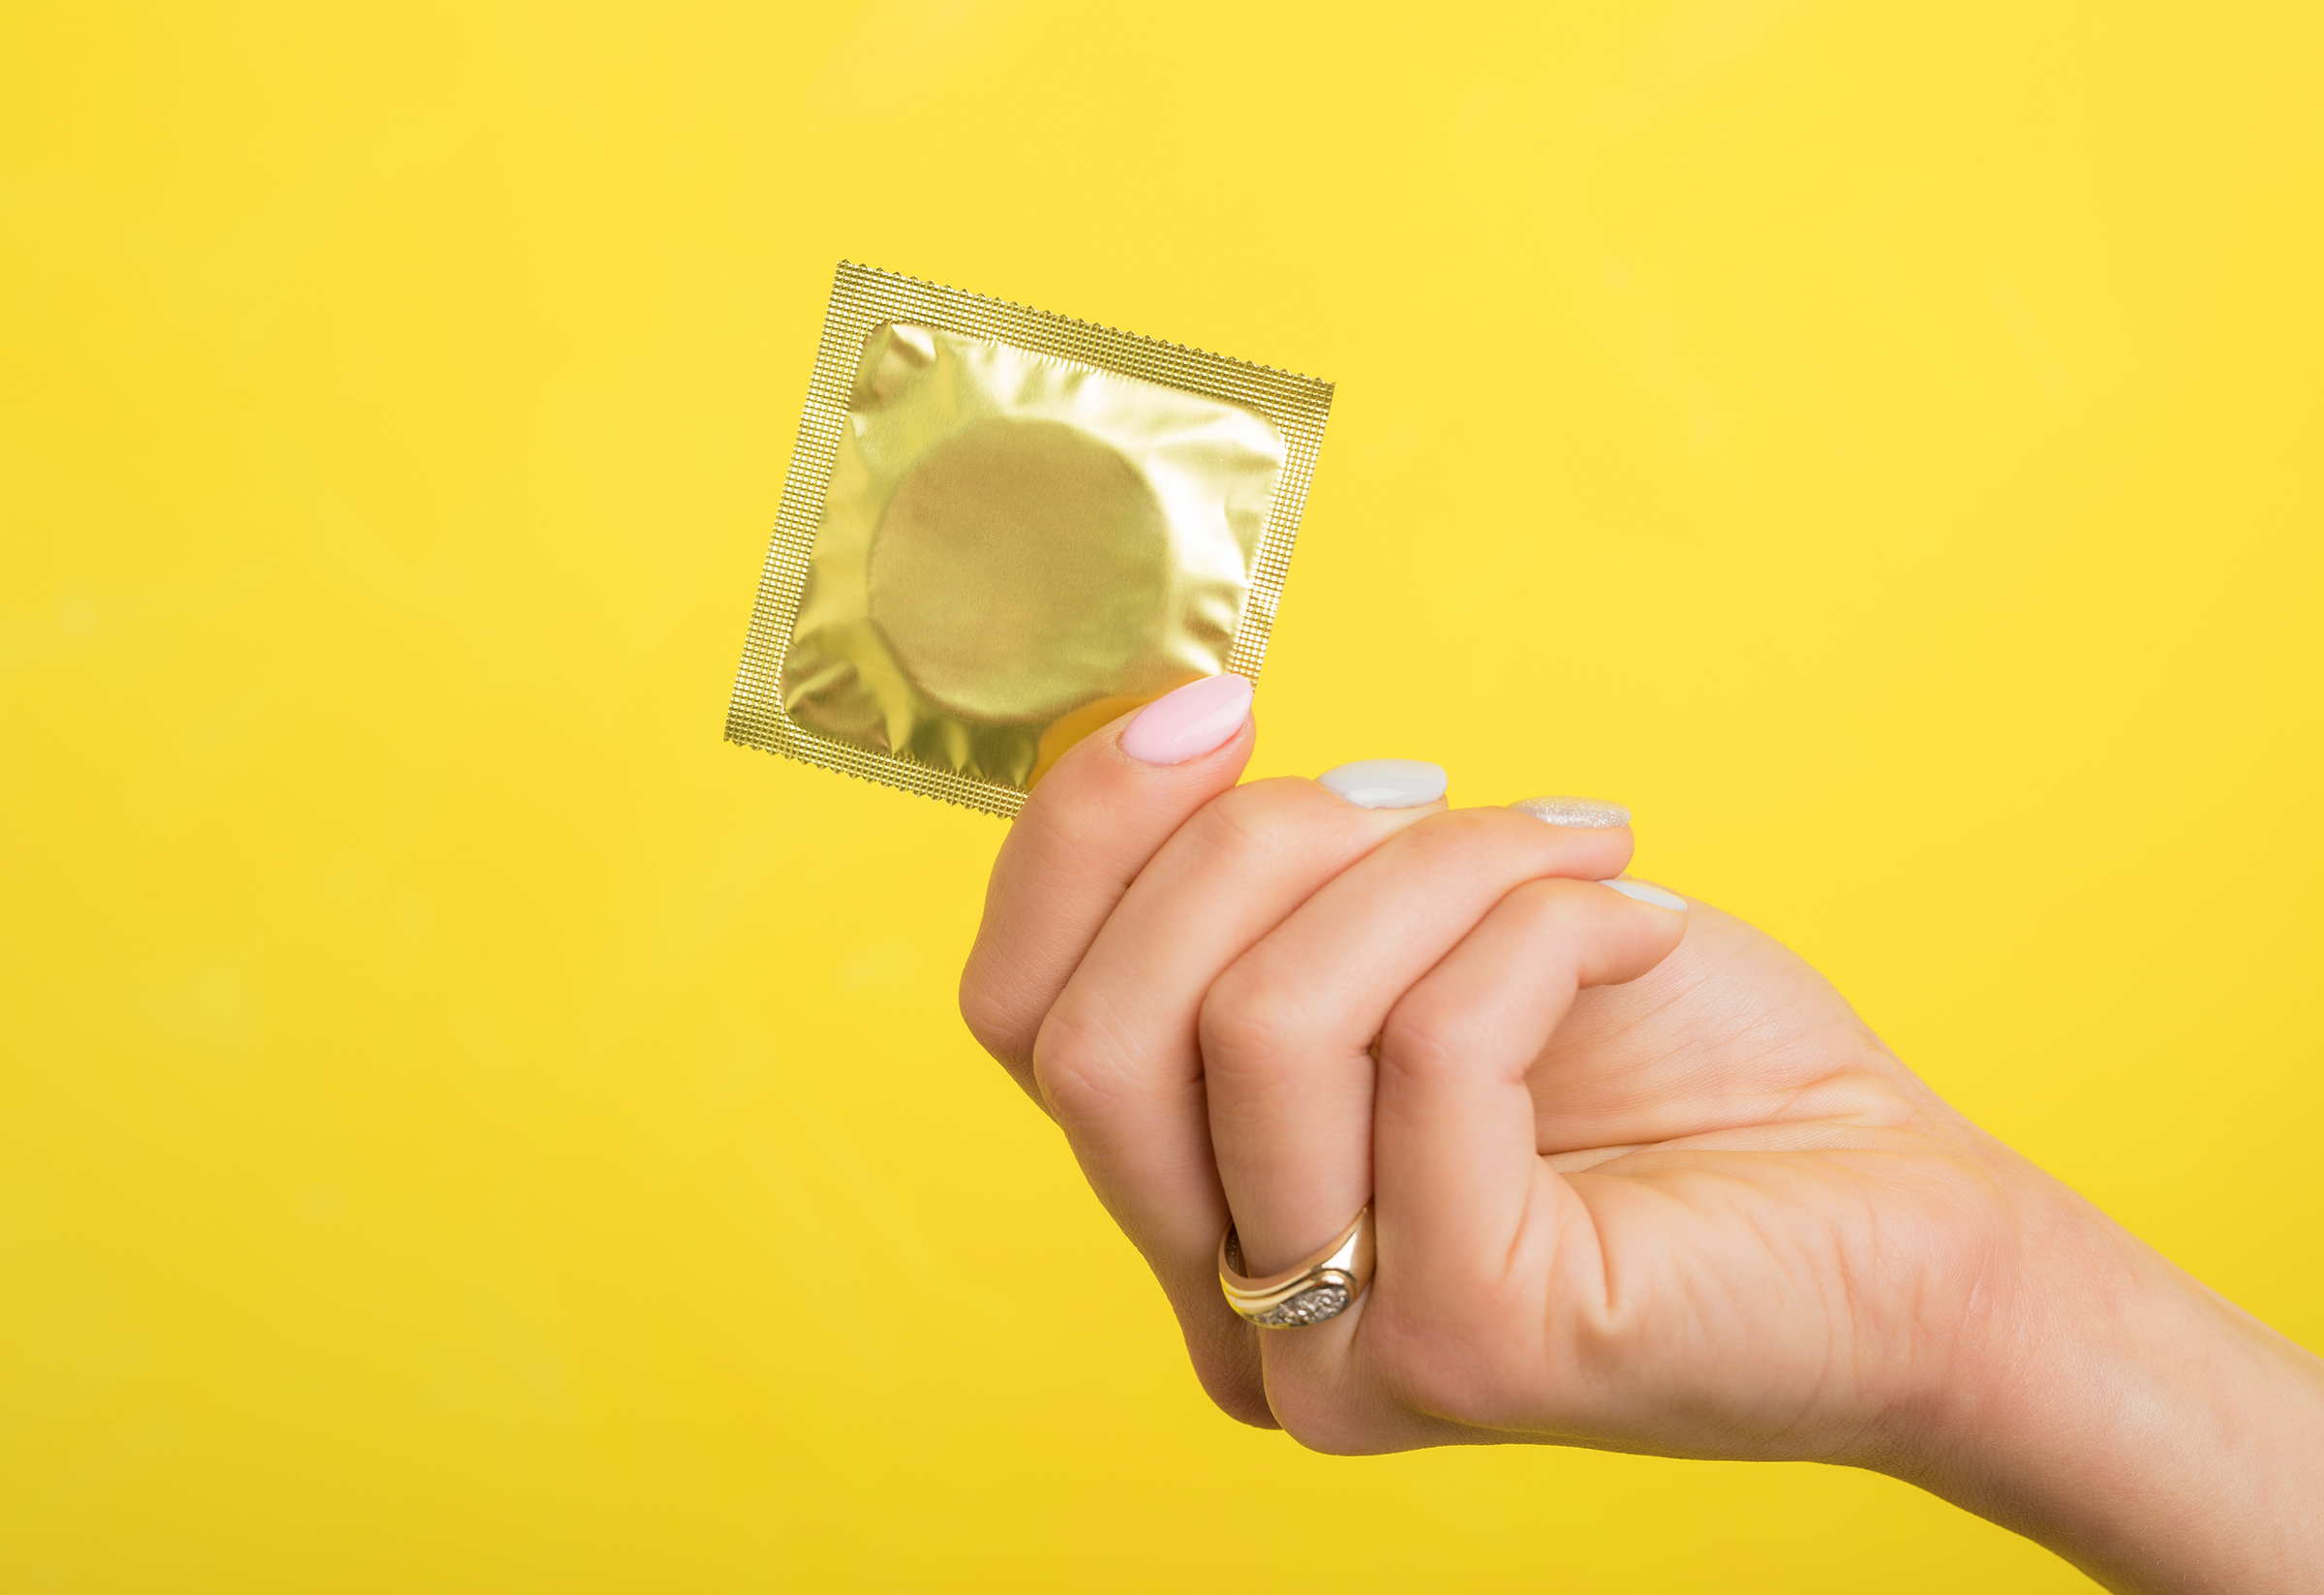 Can You Get Pregnant Using A Condom Even If It Doesn't Break